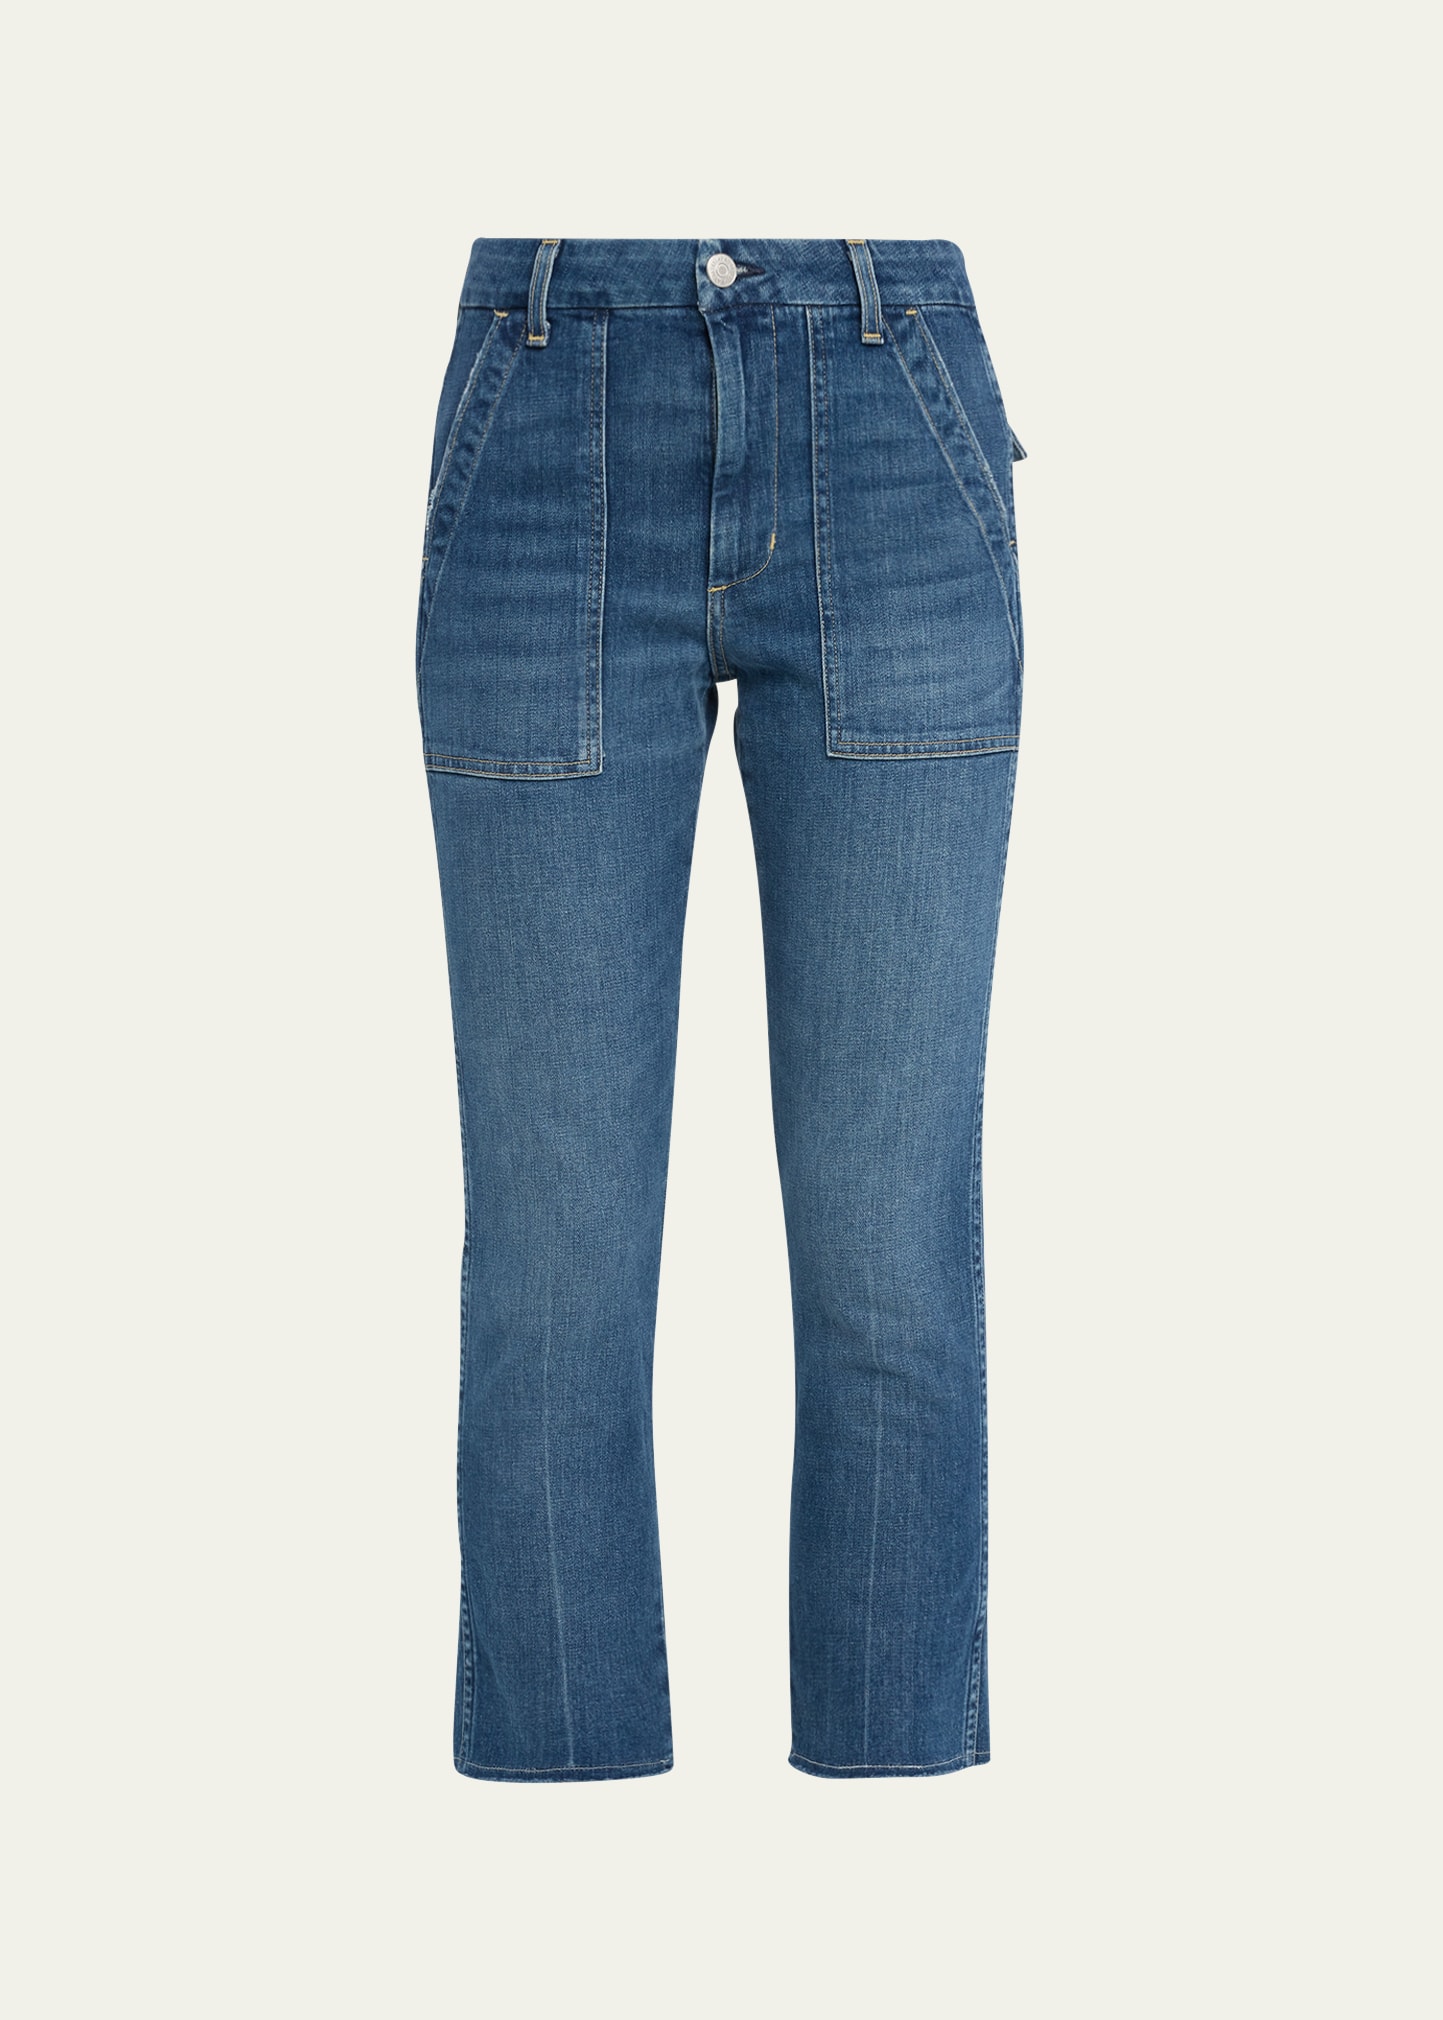 Amo Denim Easy Straight Crop Army Jeans In Graceful